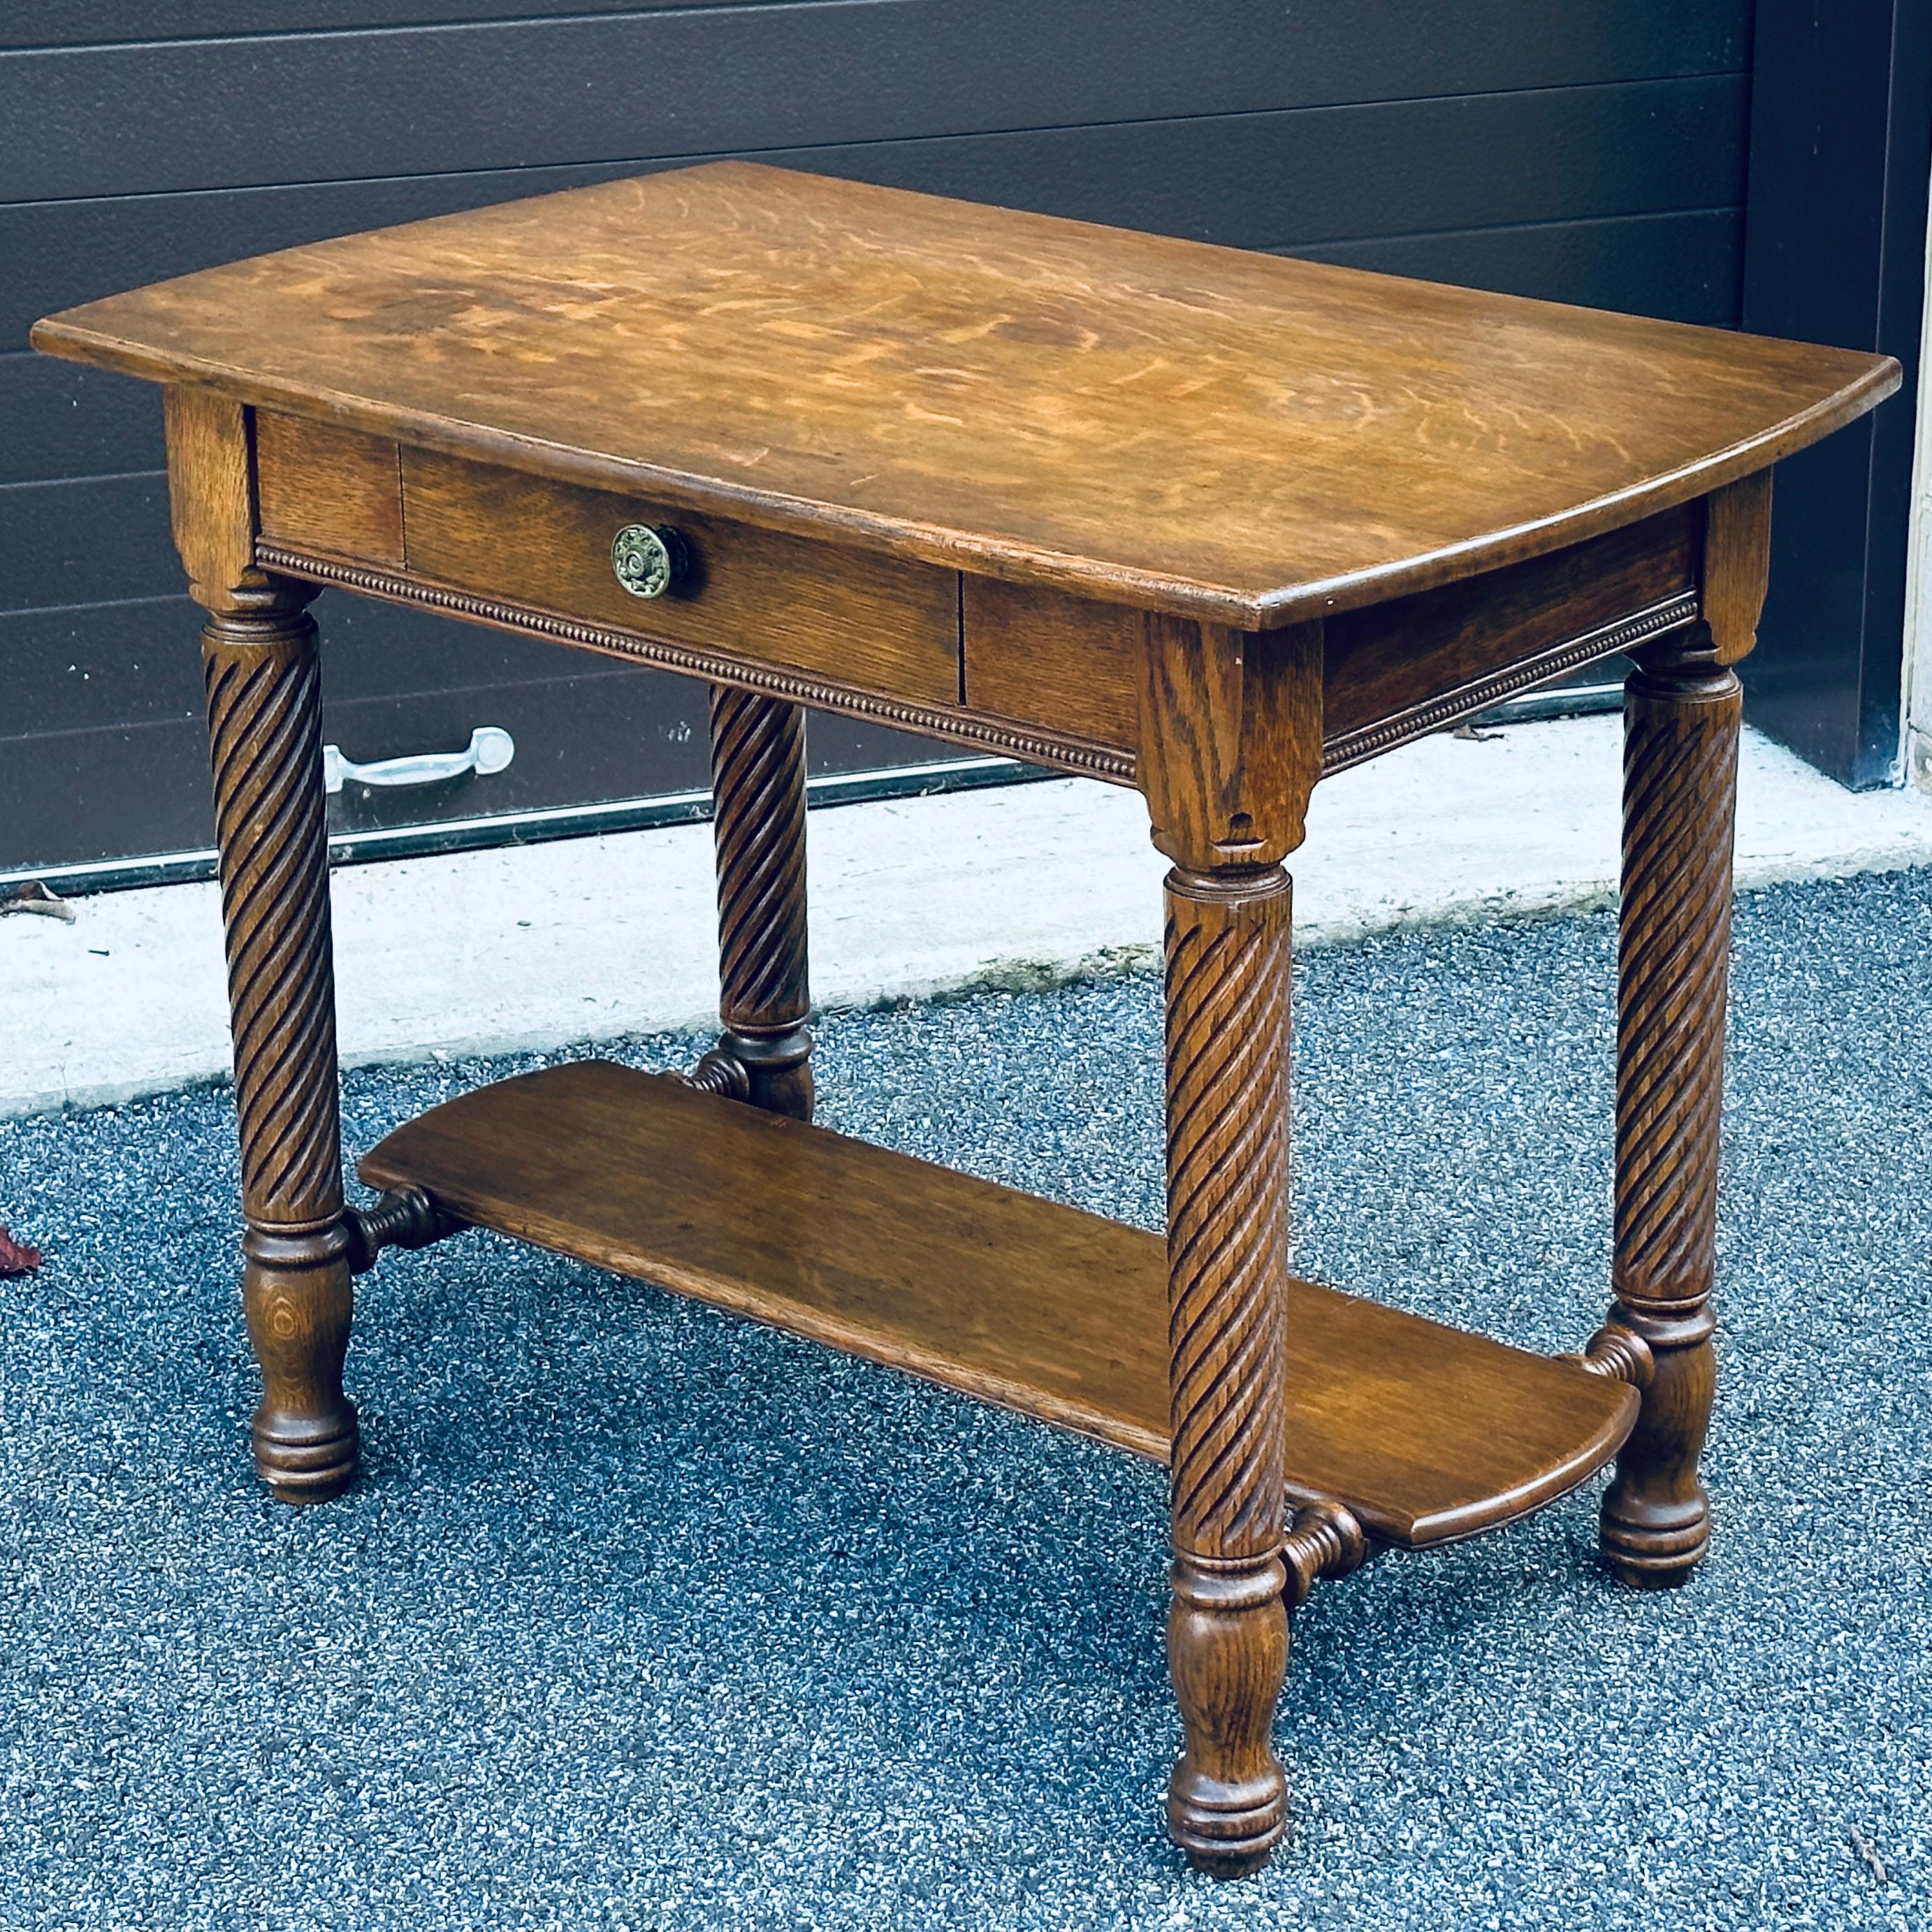 antique library table with drawer